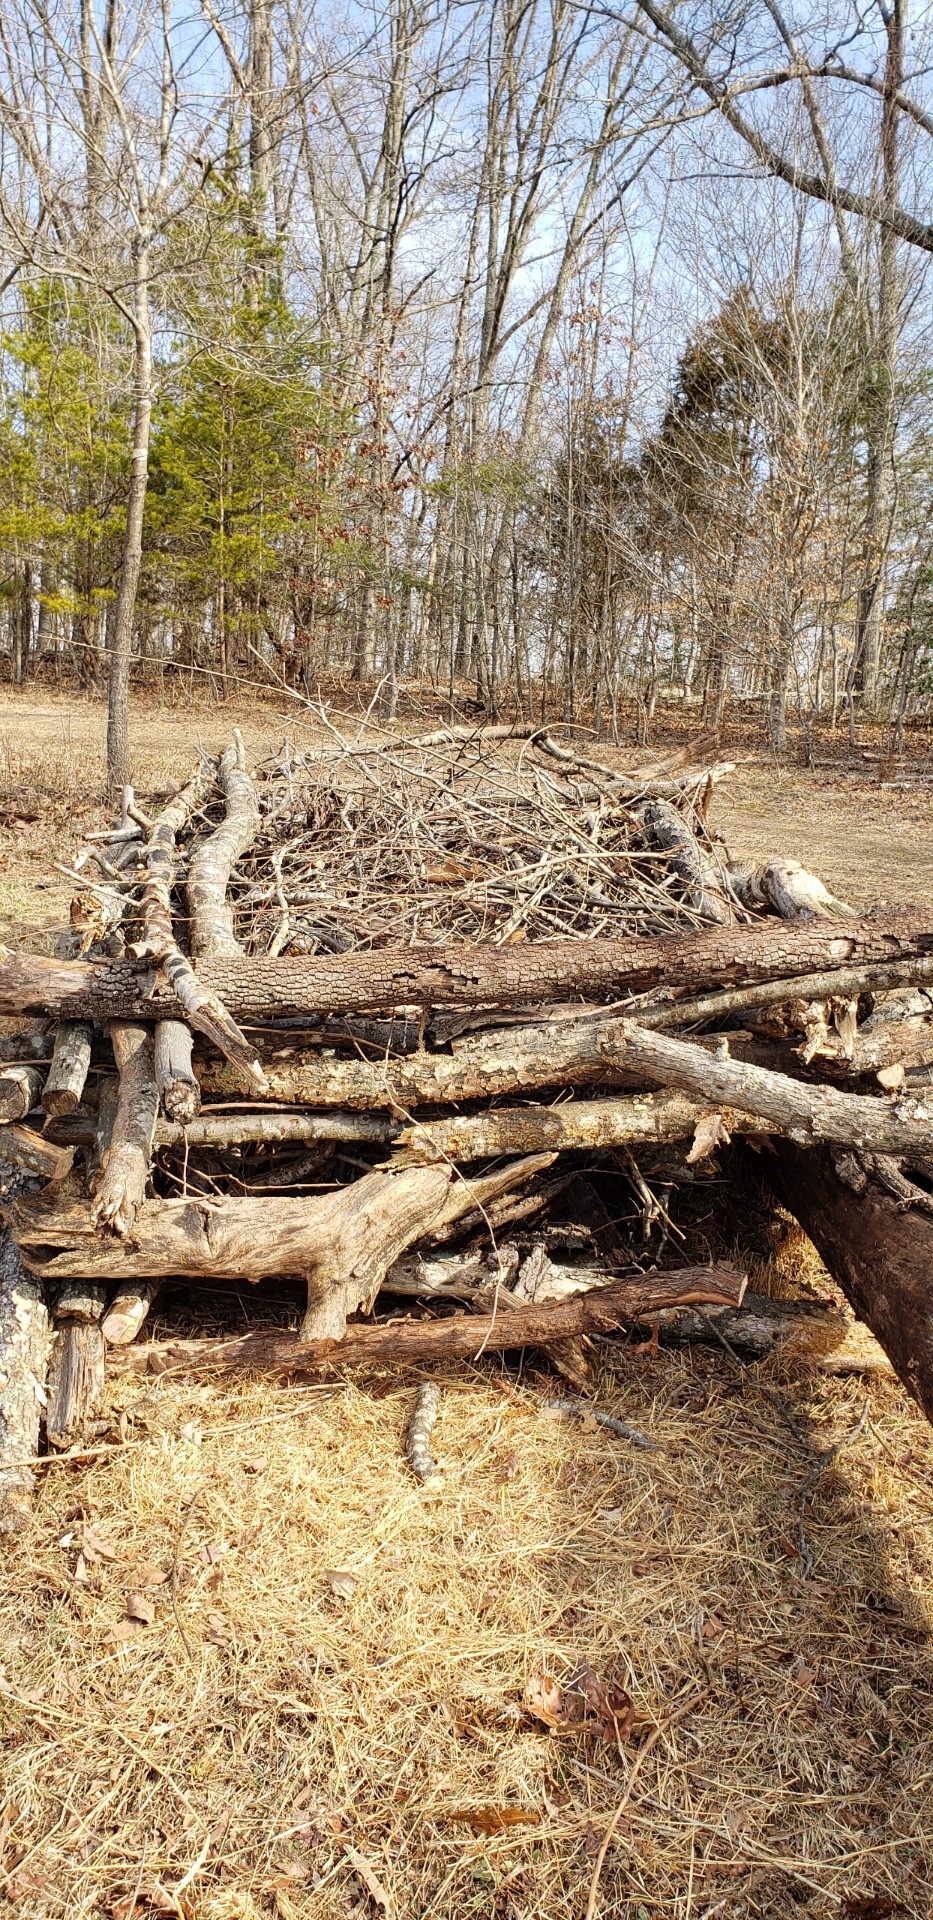 Brush Pile in south field